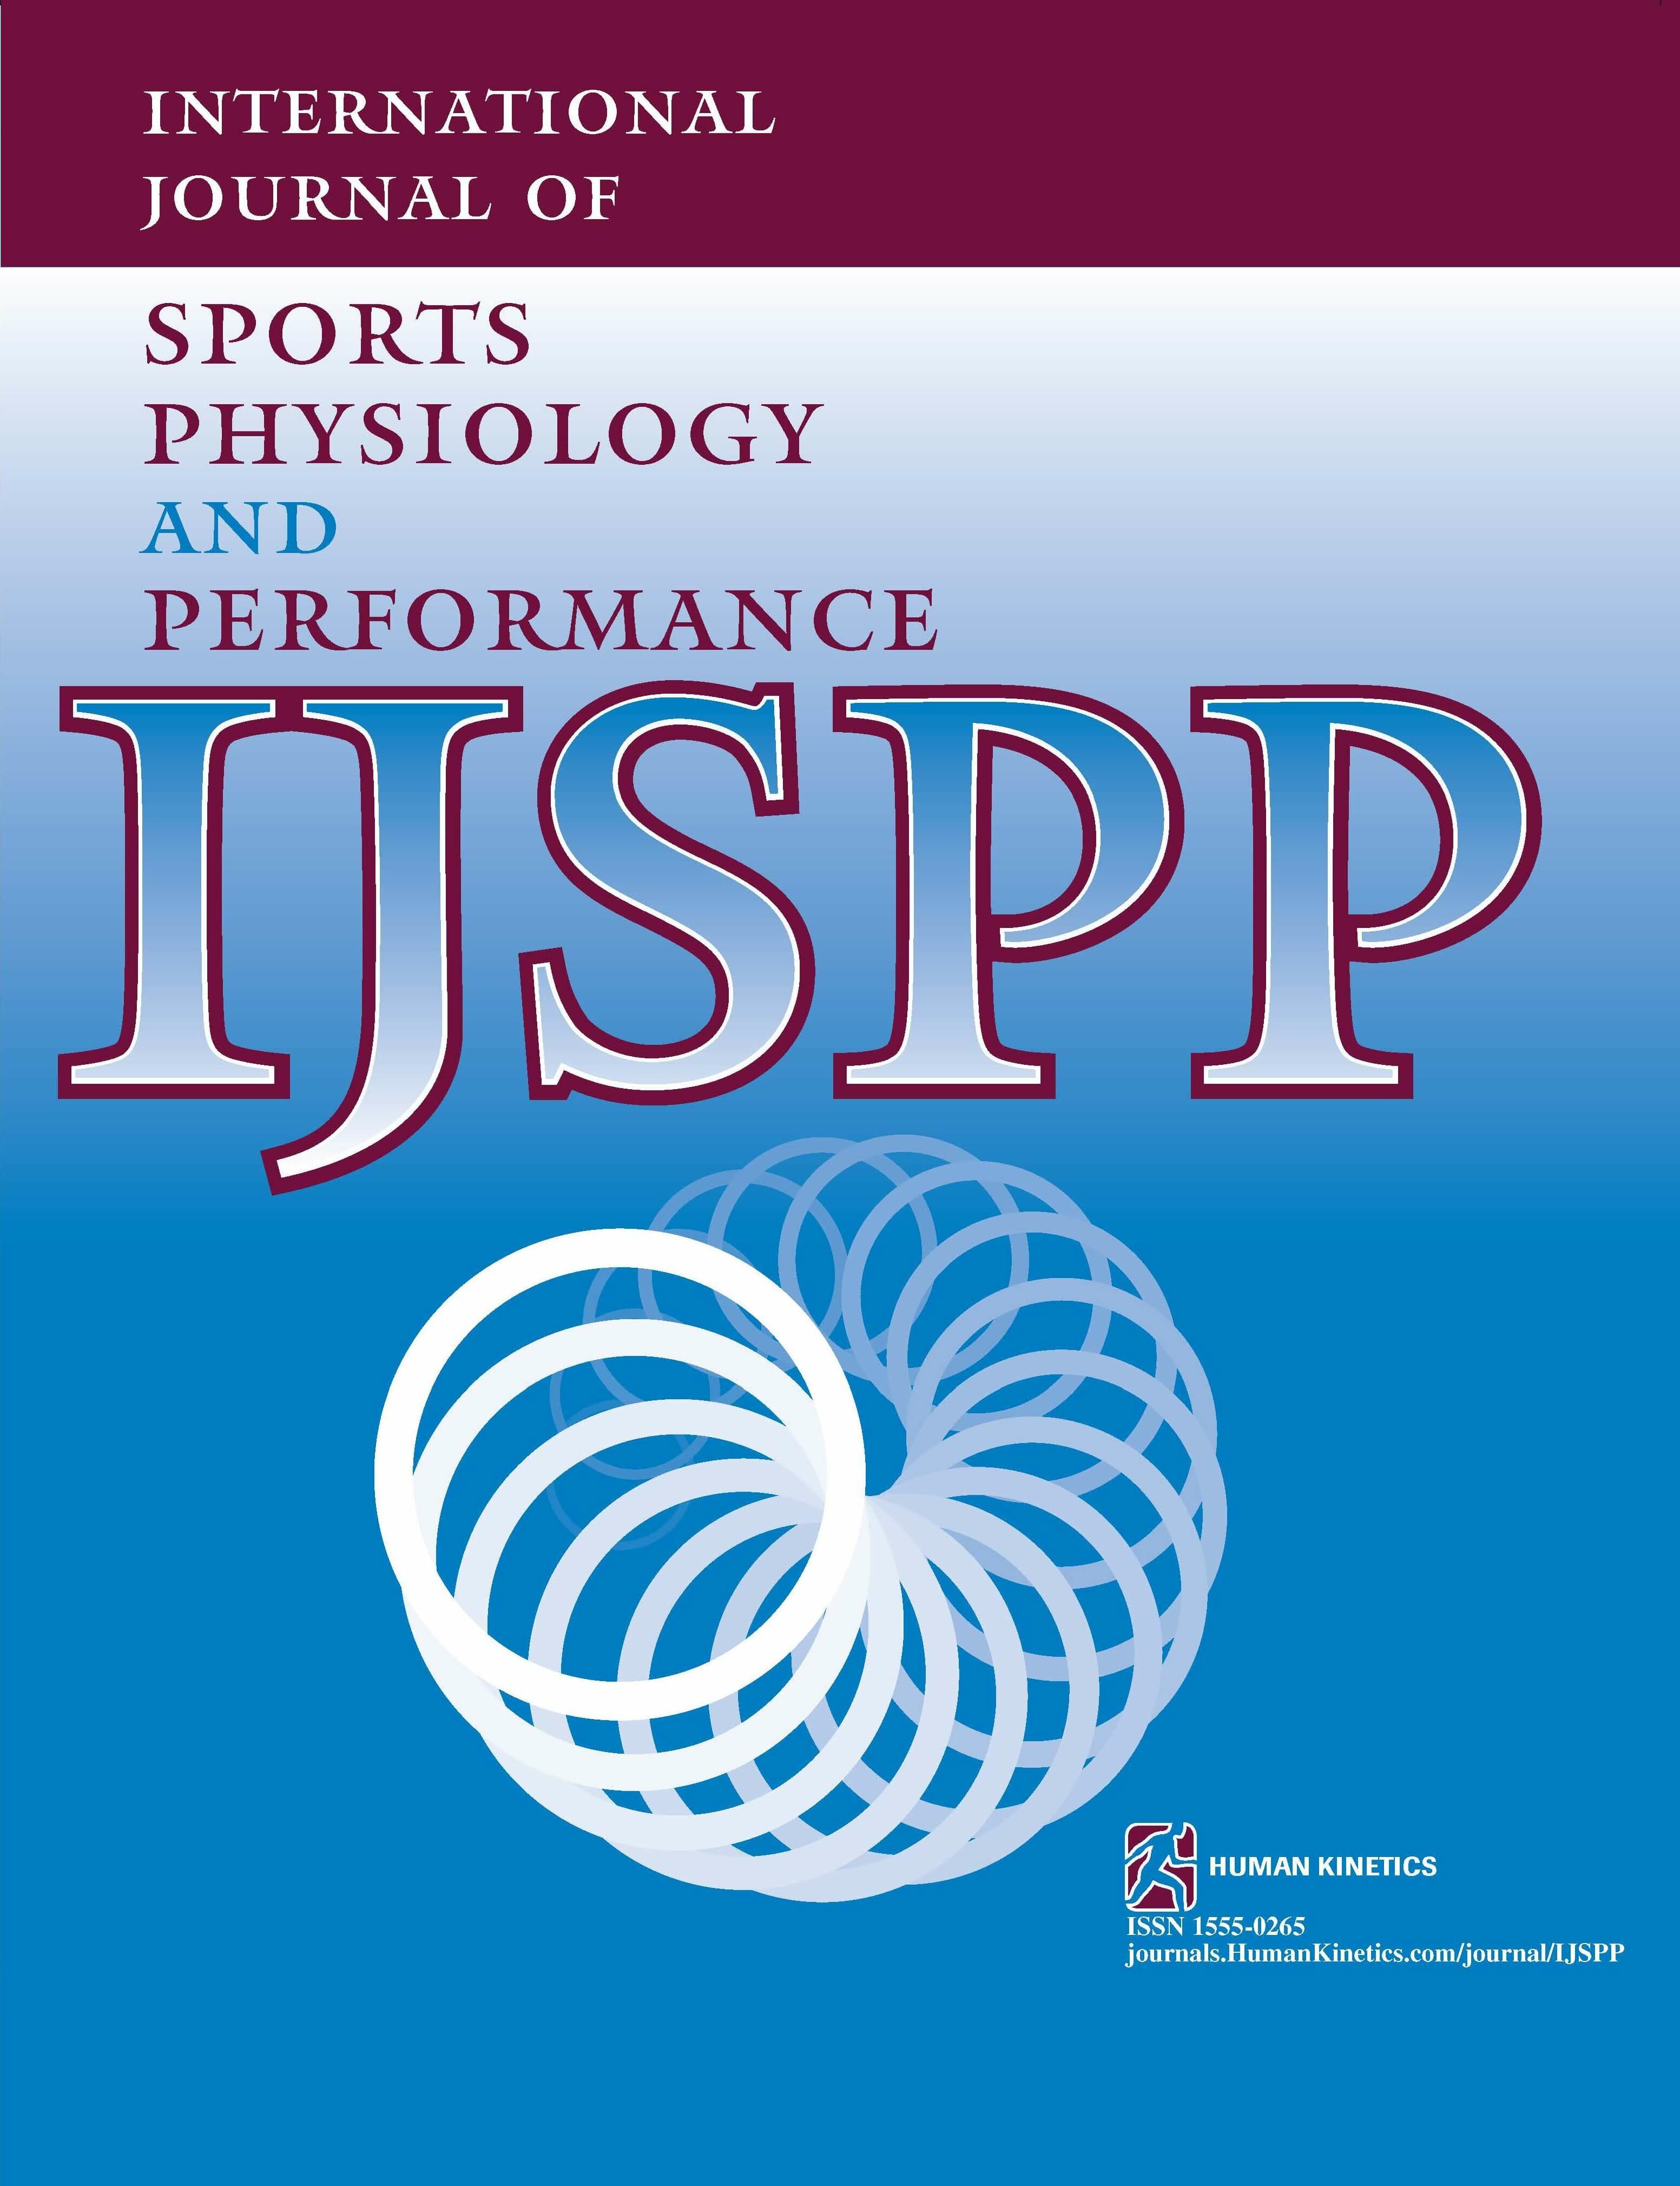 The Relationship Between Lower-Body Force–Time Variables and Skating Performance in Female Ice Hockey Players